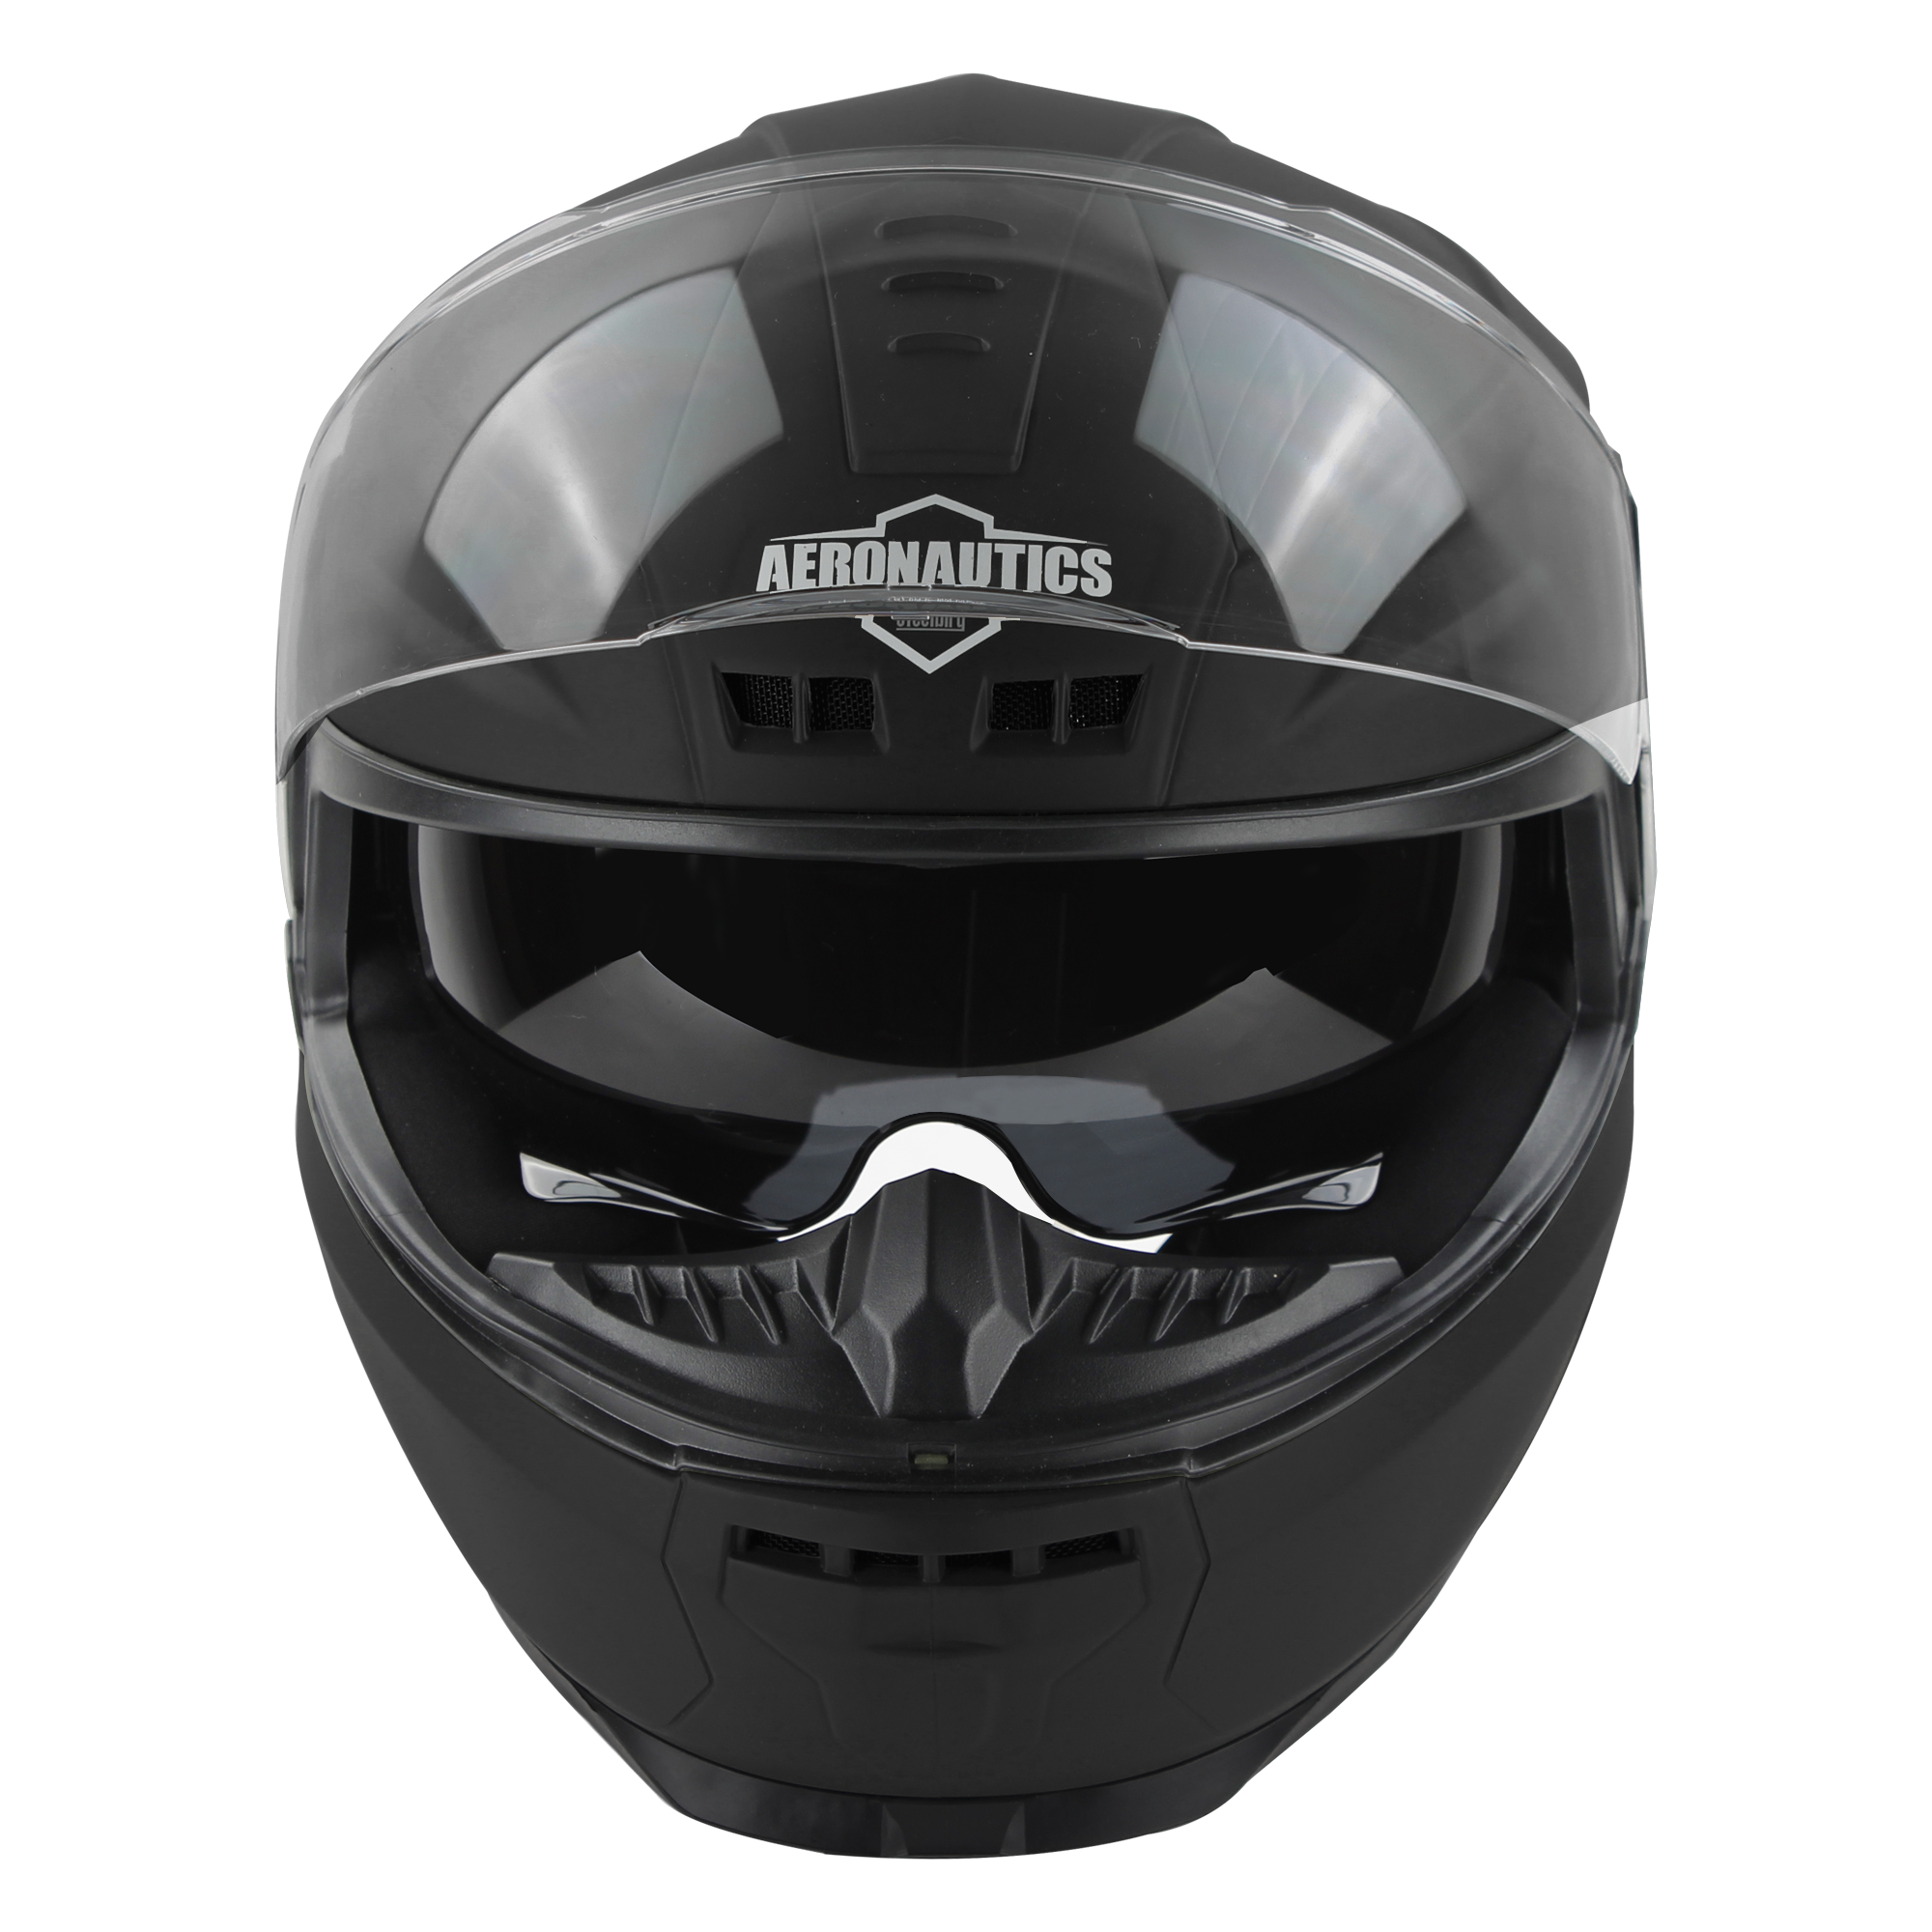 SBH-40 GLOSSY BLACK WITH INNER SUN SHIELD AND MEDIUM-END INTERIOR